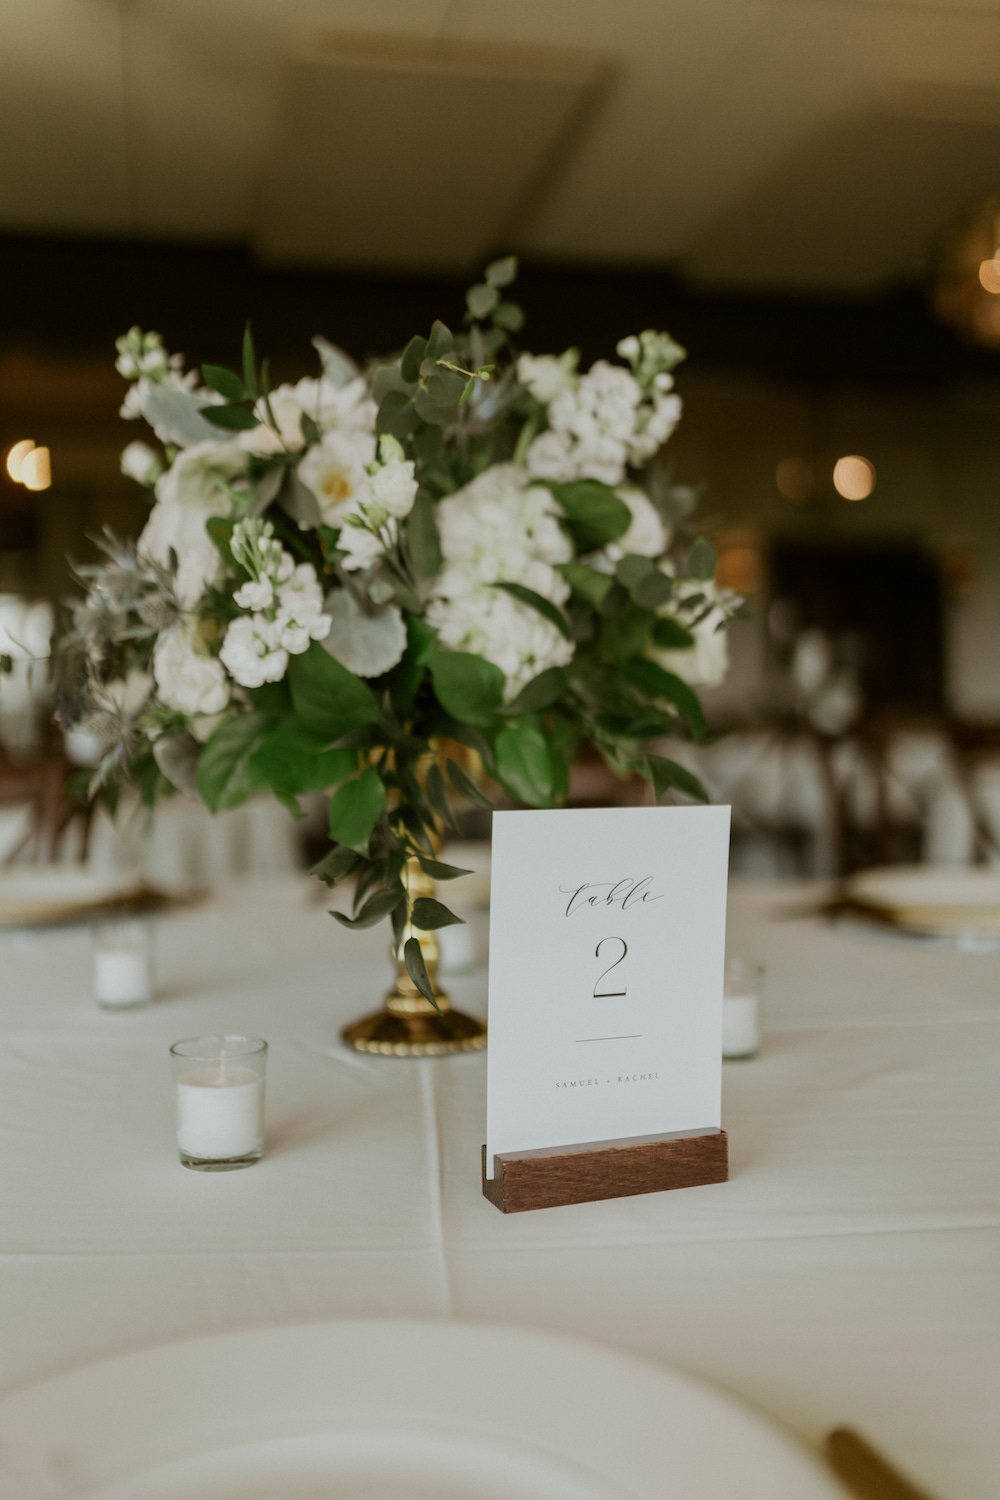 White floral centerpiece with table number for guests.